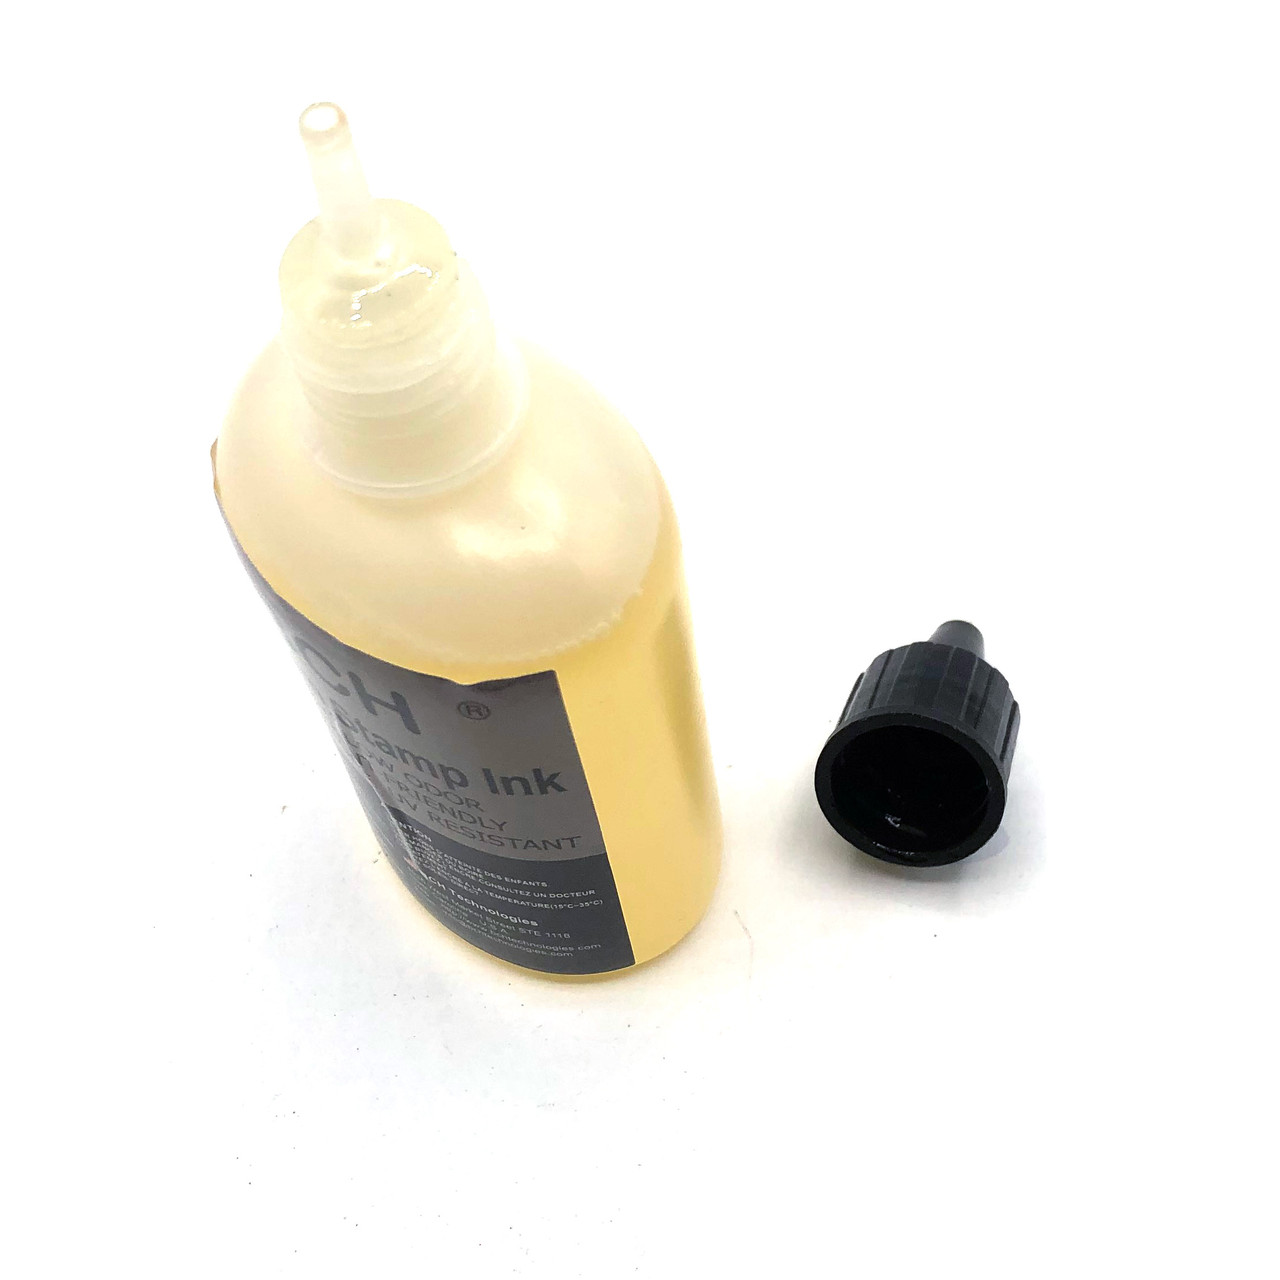 BCH Premium All Surface Stamp Ink Solvent Based Fast Dry Black